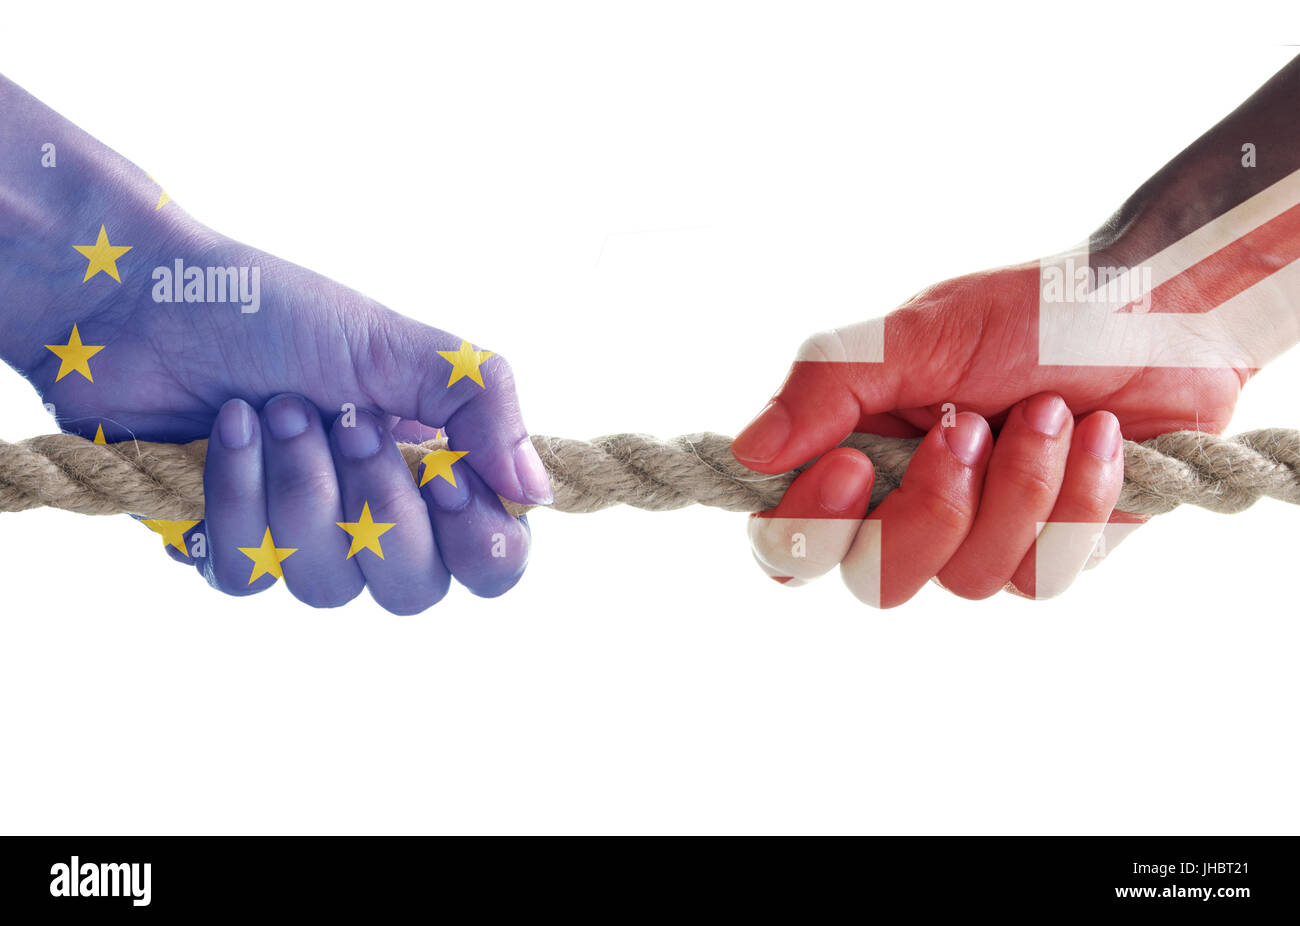 Tug of war between hands painted with UK and European flags Stock Photo